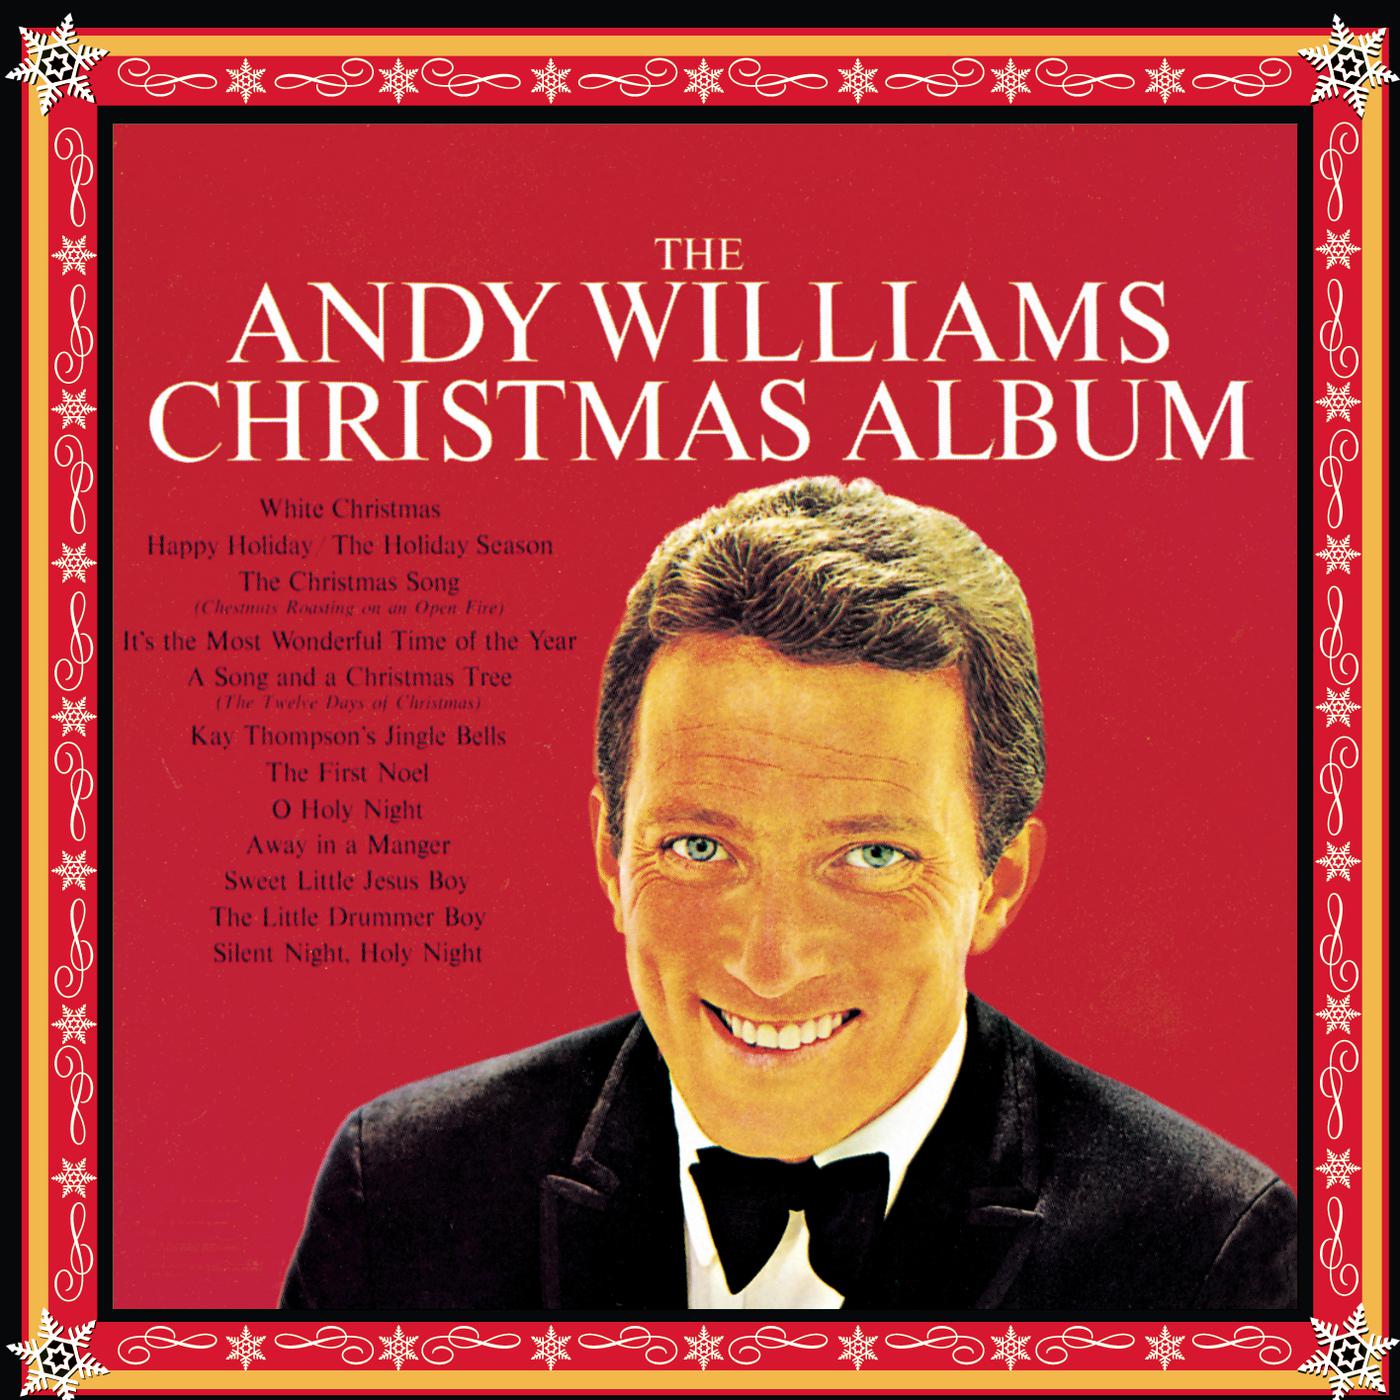 Happy Holiday / The Holiday Season歌词 歌手Andy Williams-专辑The Andy Williams Christmas Album-单曲《Happy Holiday / The Holiday Season》LRC歌词下载